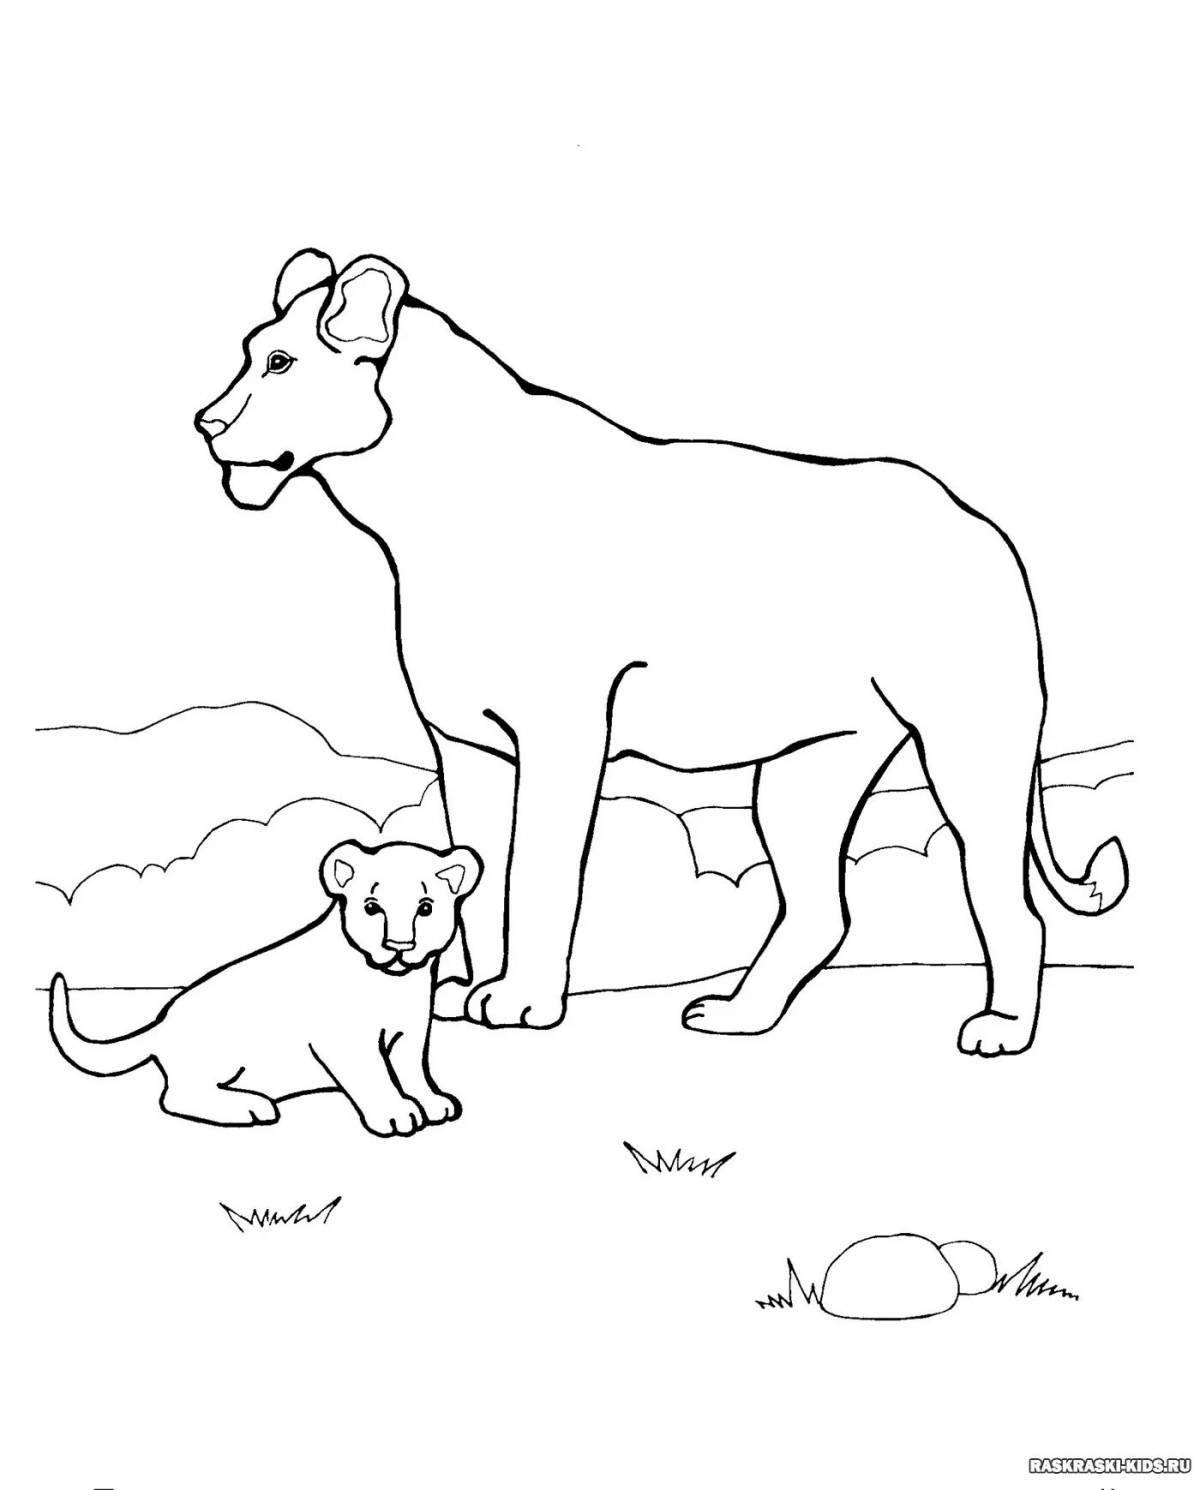 Coloring page gorgeous wild animal and baby